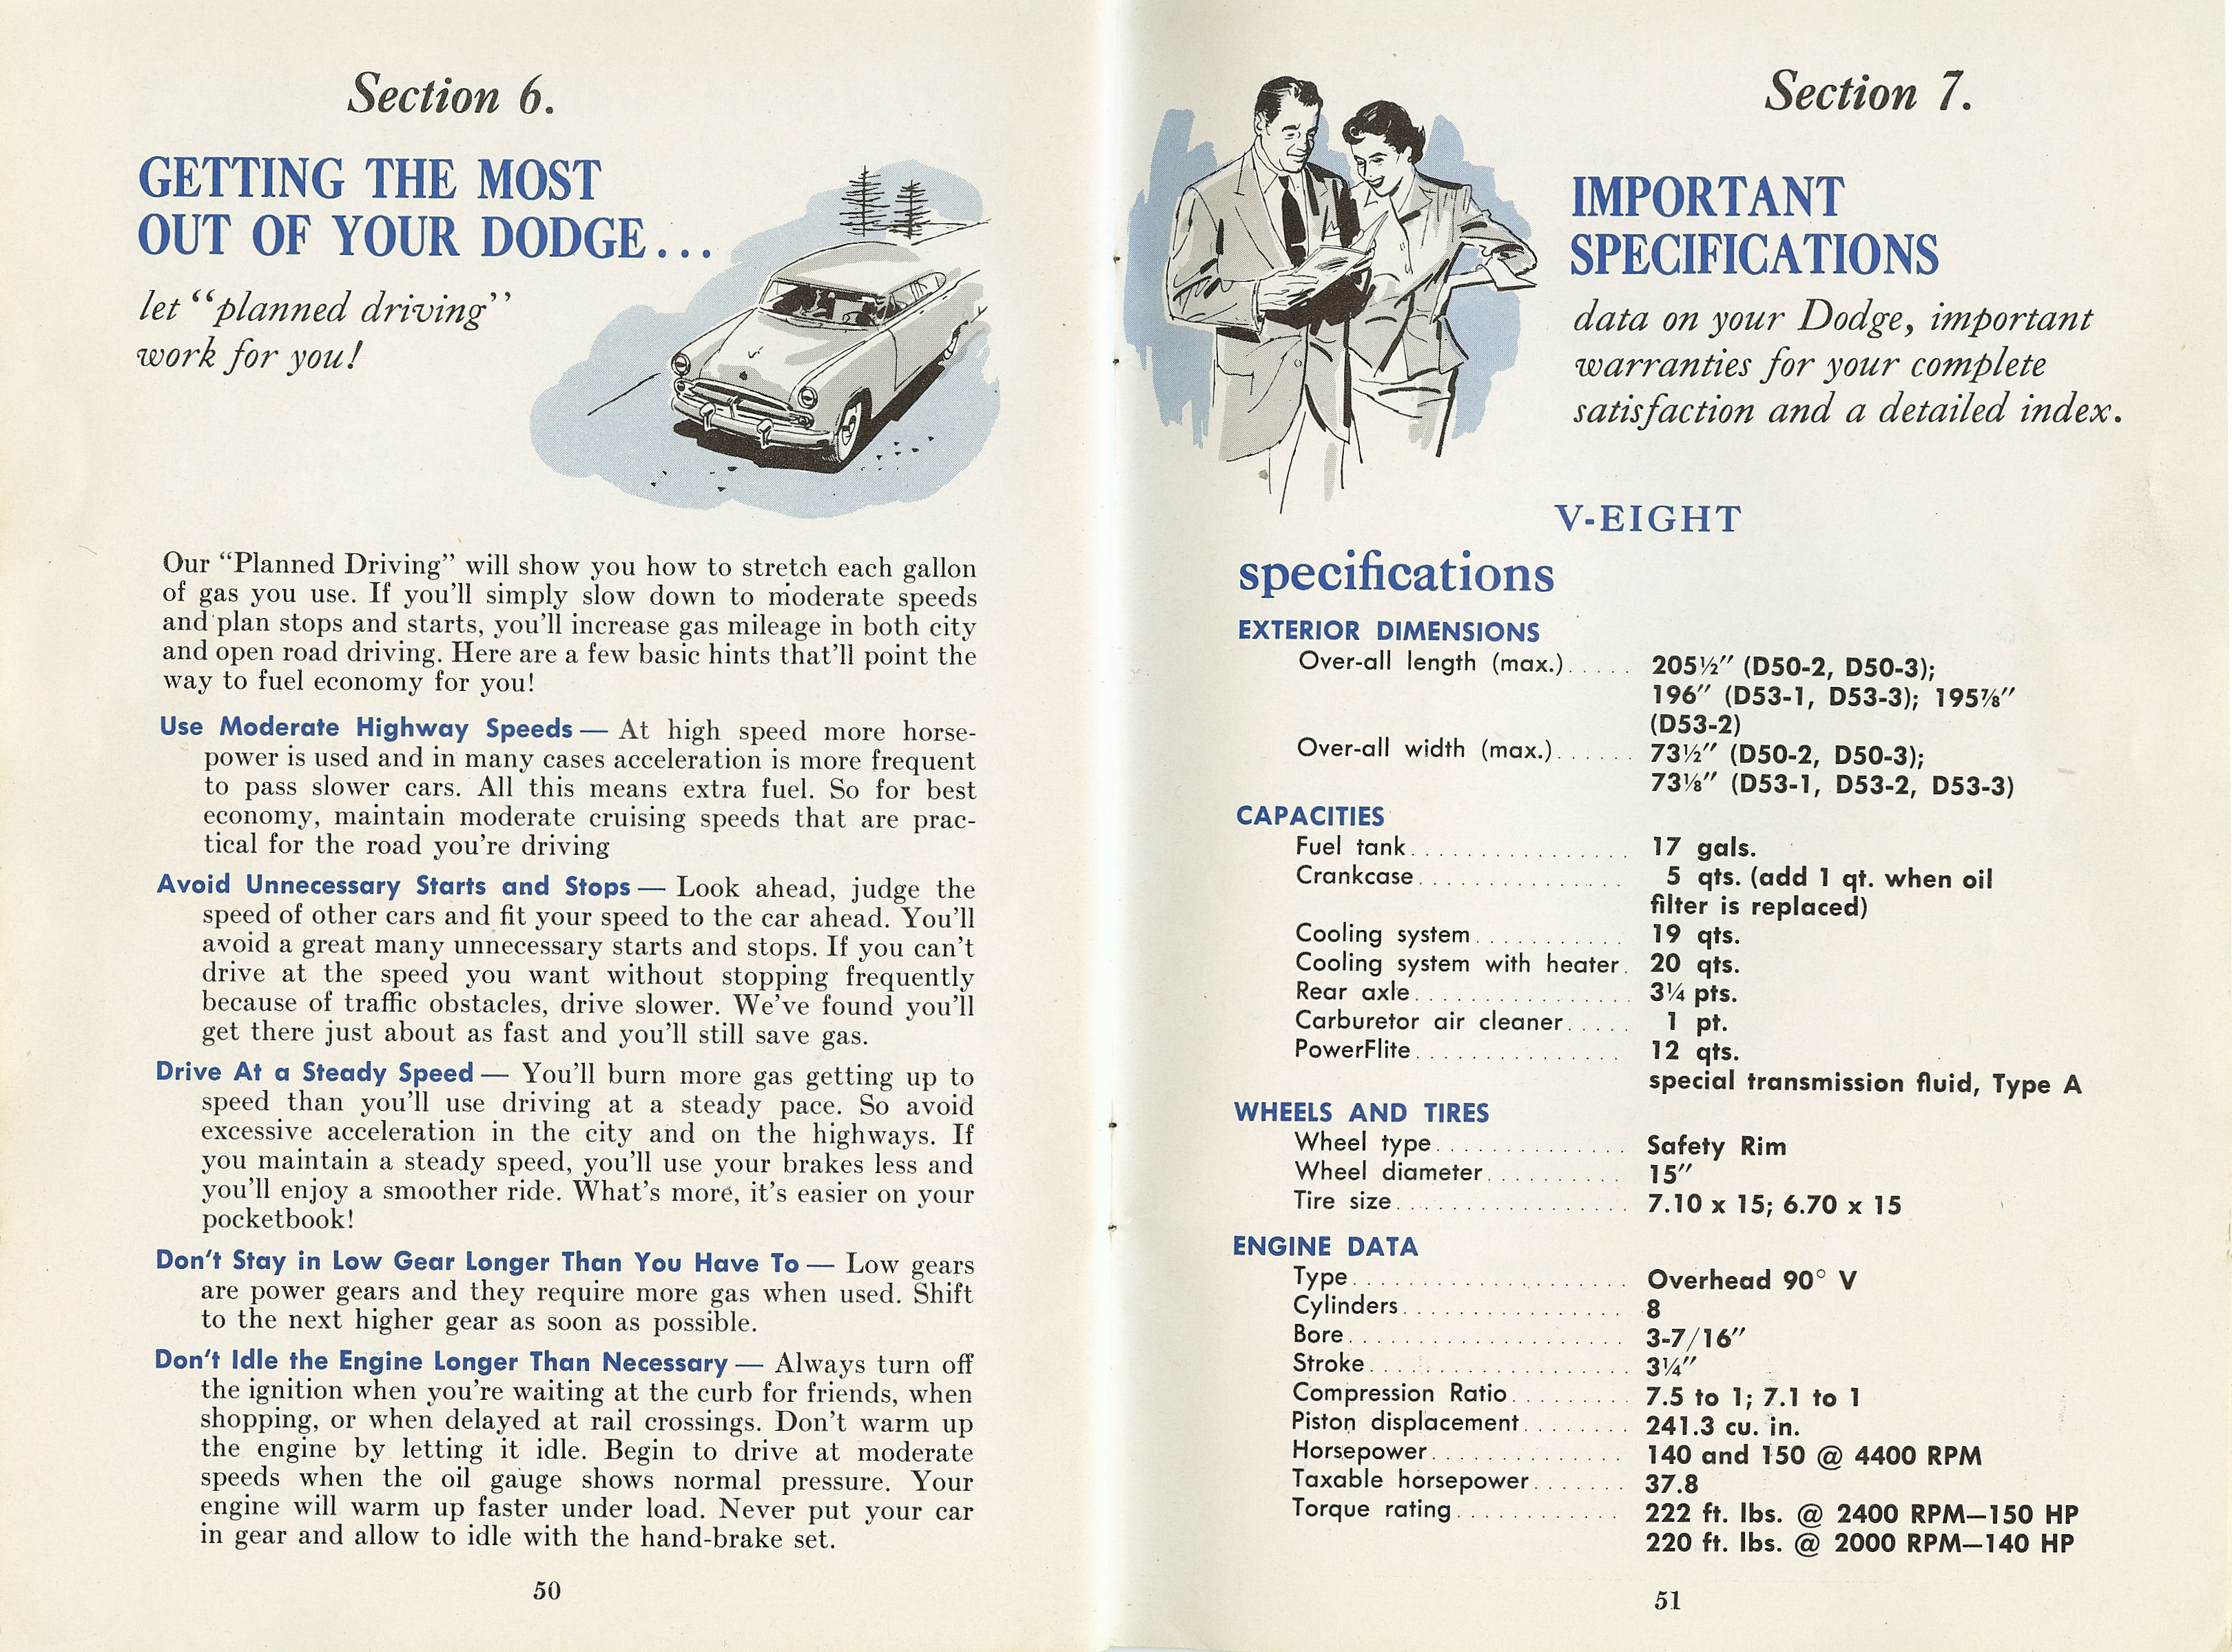 1954 Dodge Car Owners Manual Page 21